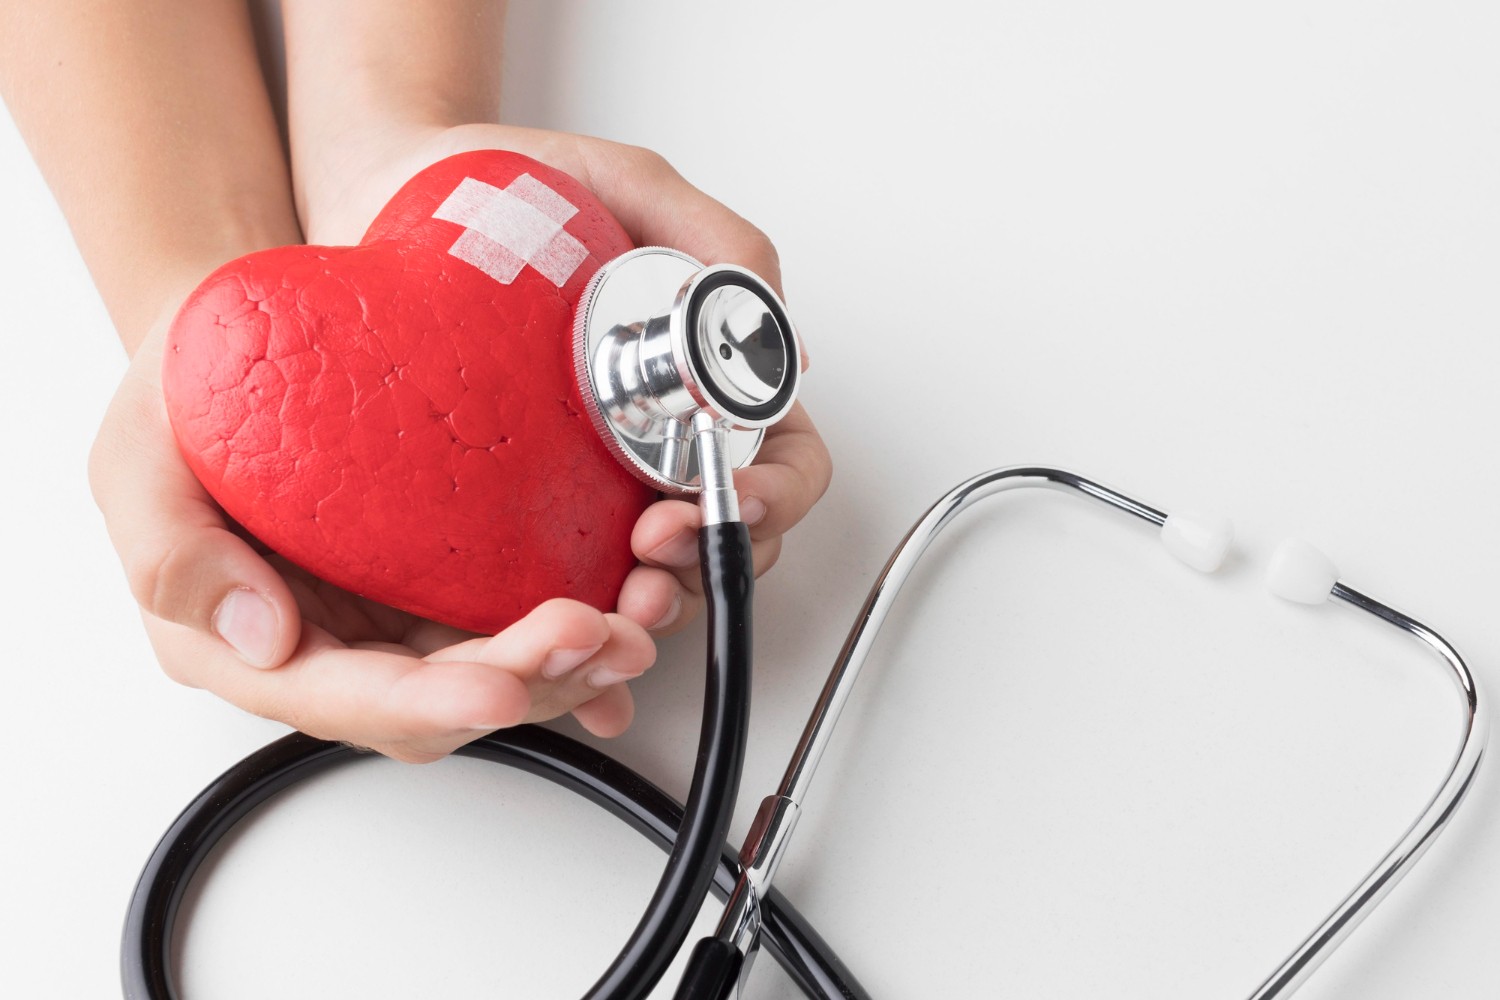 8 Things You Should Do for a Healthy Heart